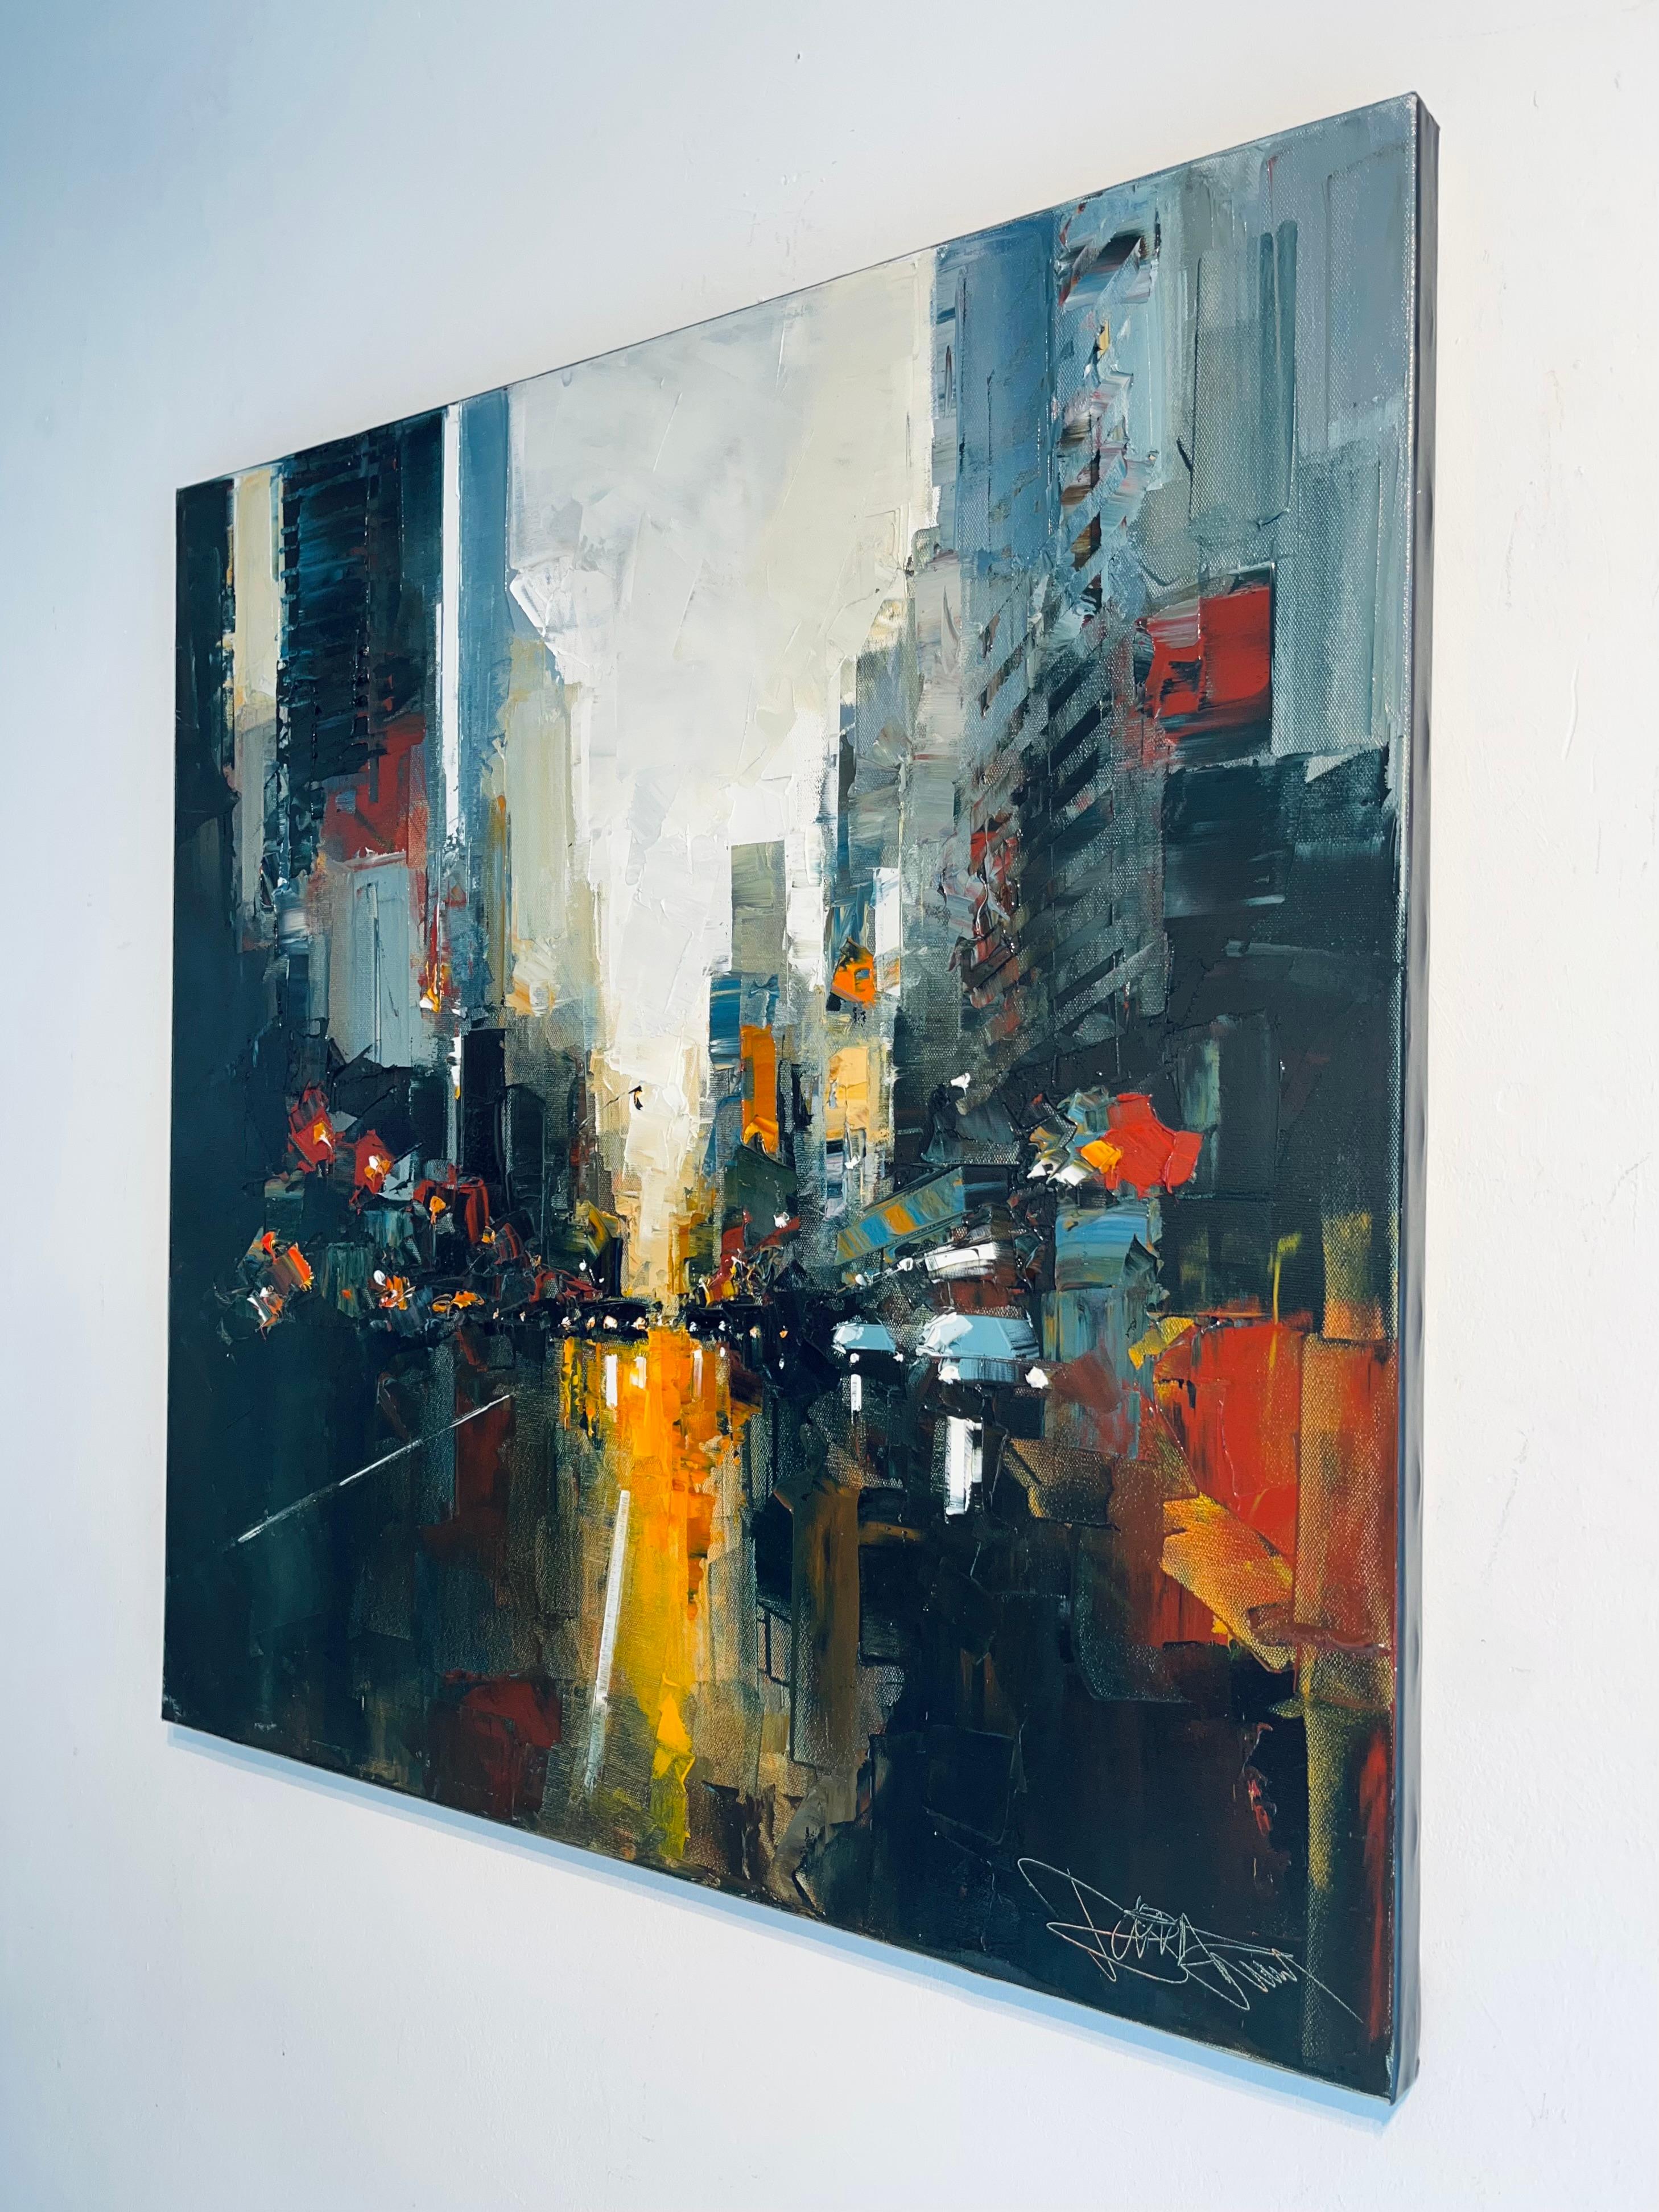 Dynamic Dusk, NY-original abstract cityscape PAINTING-ARTWORK- CONTEMPORARY aRT - Expressionist Painting by Daniel Castan